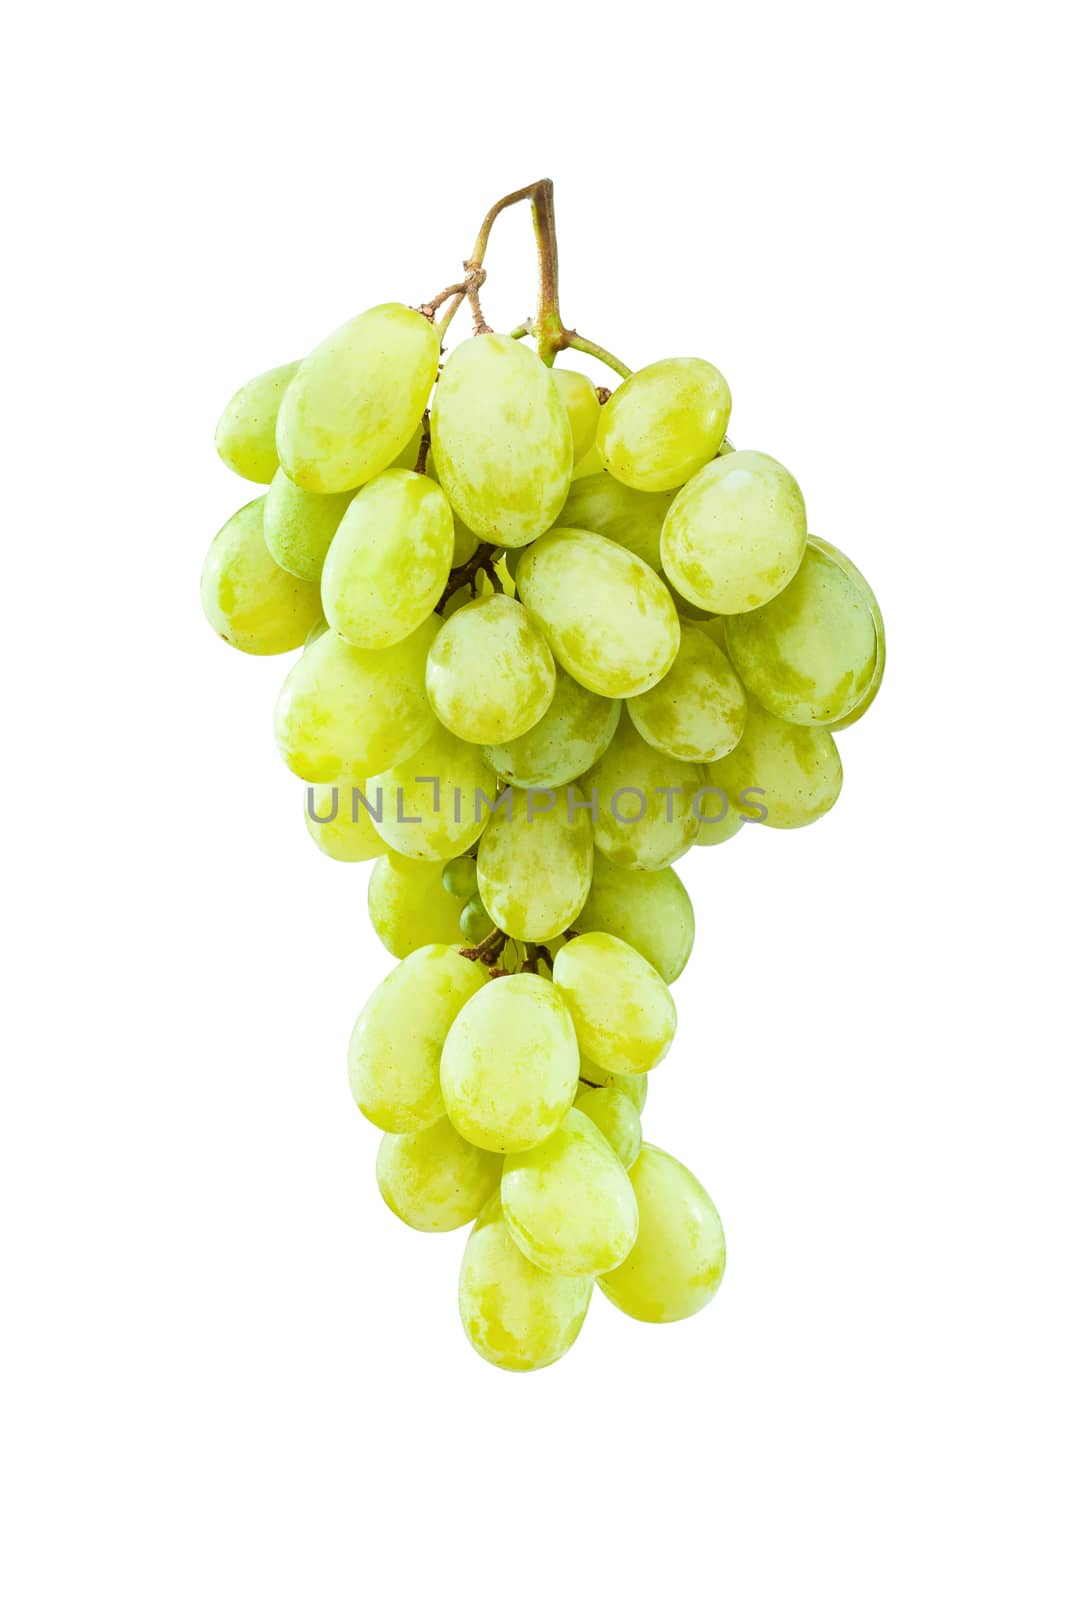 Fresh and ripe green grapes hanging against white background